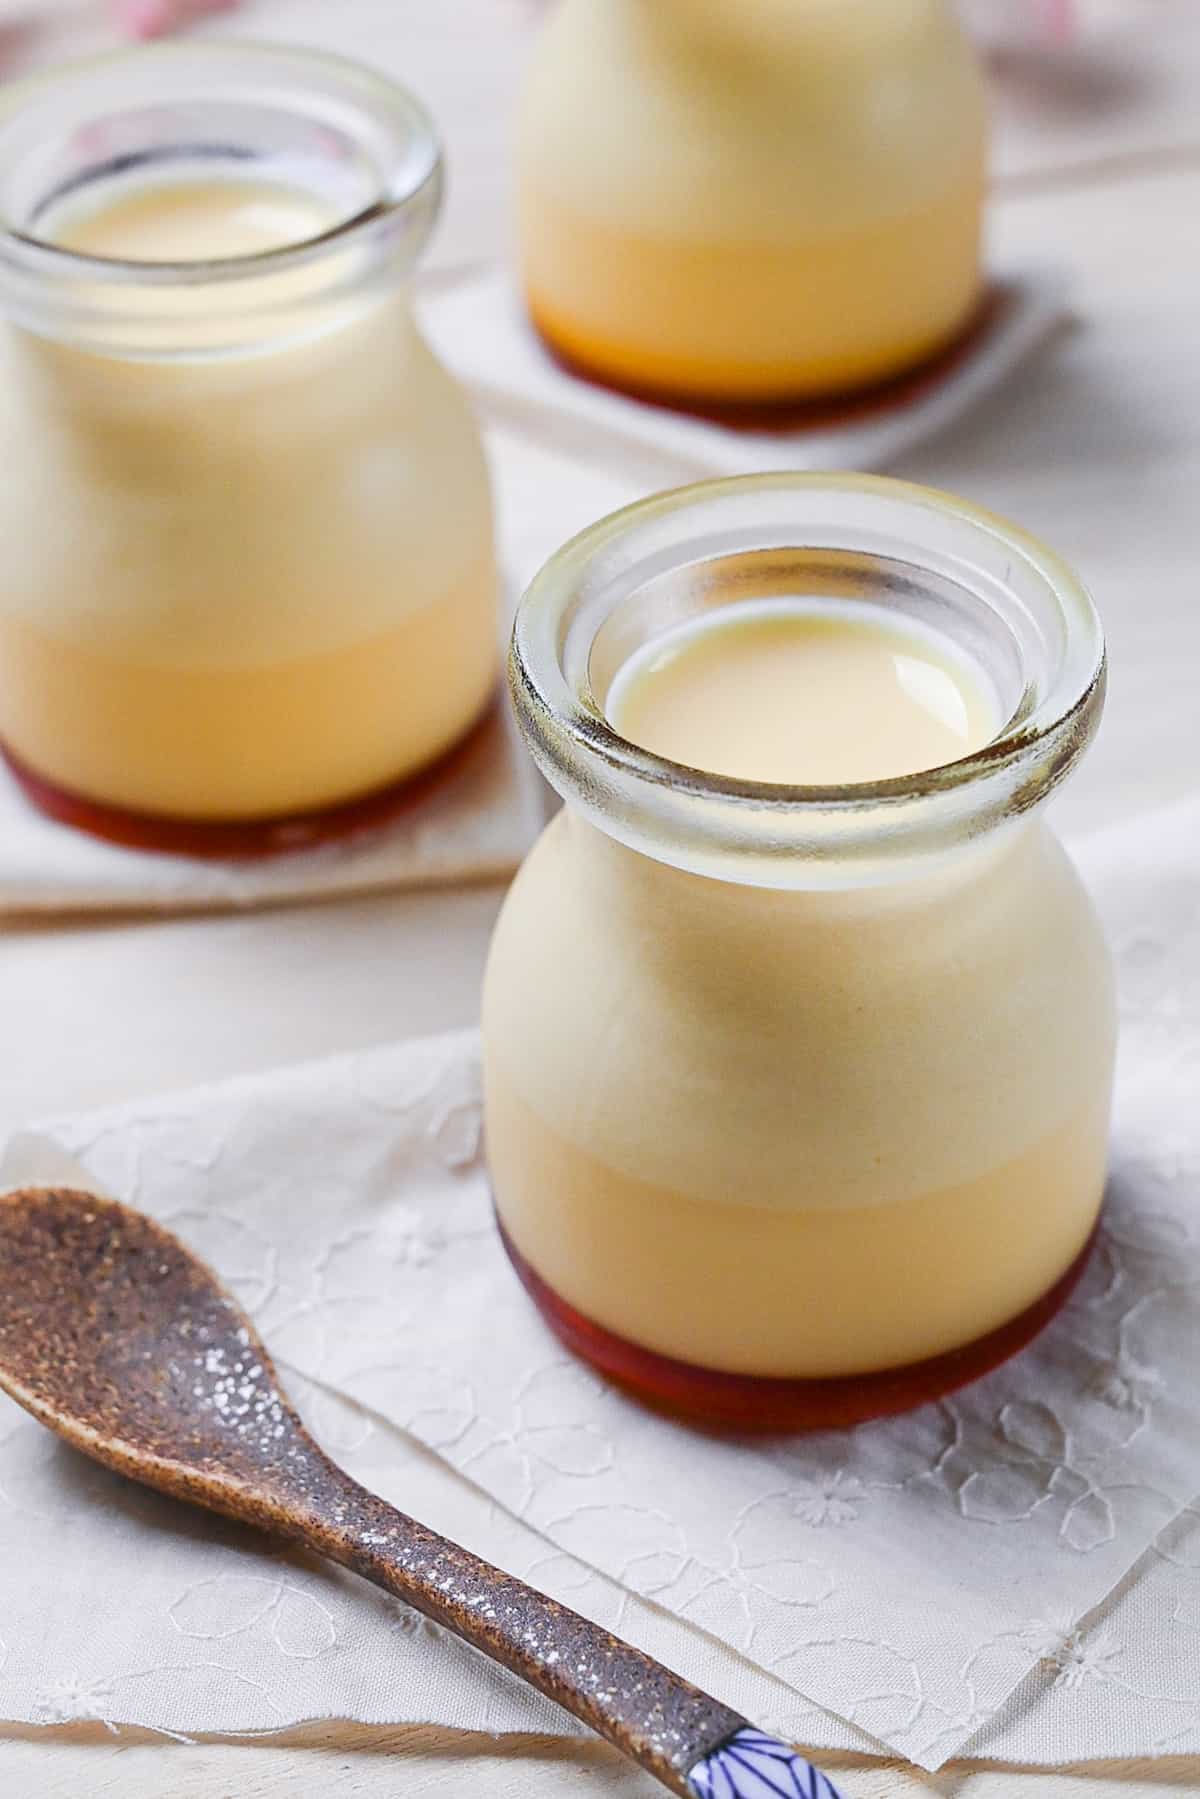 Japanese style custard pudding (purin) in glass jars